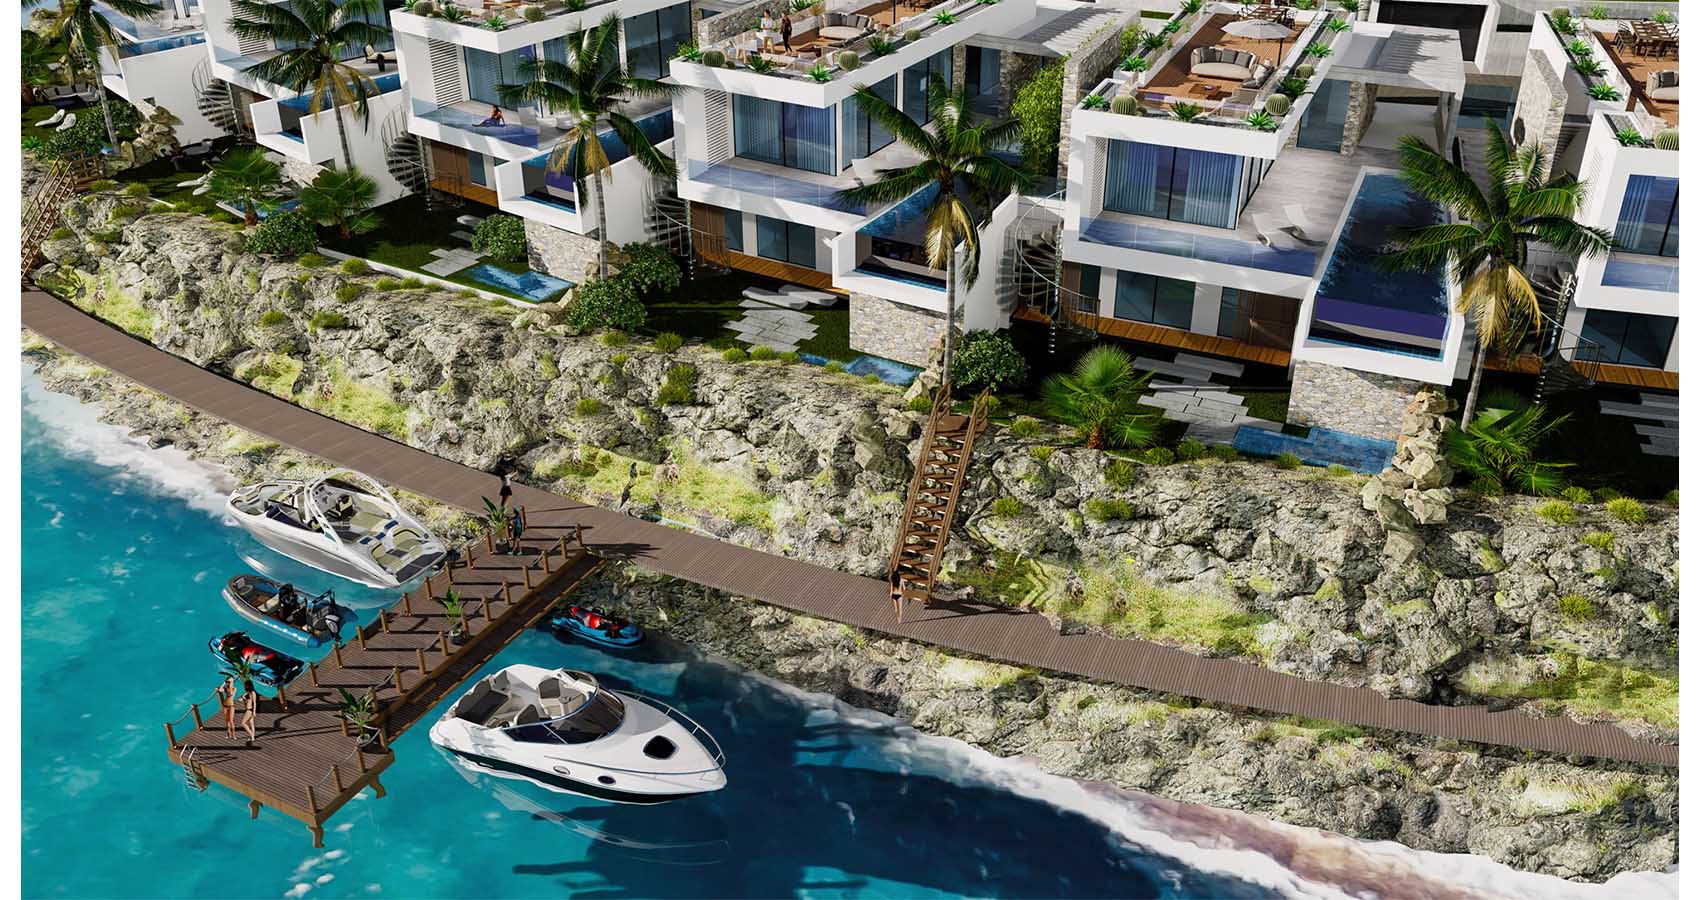 N. Project luxury apartment by the sea Cyprus/Kucukerenkoy